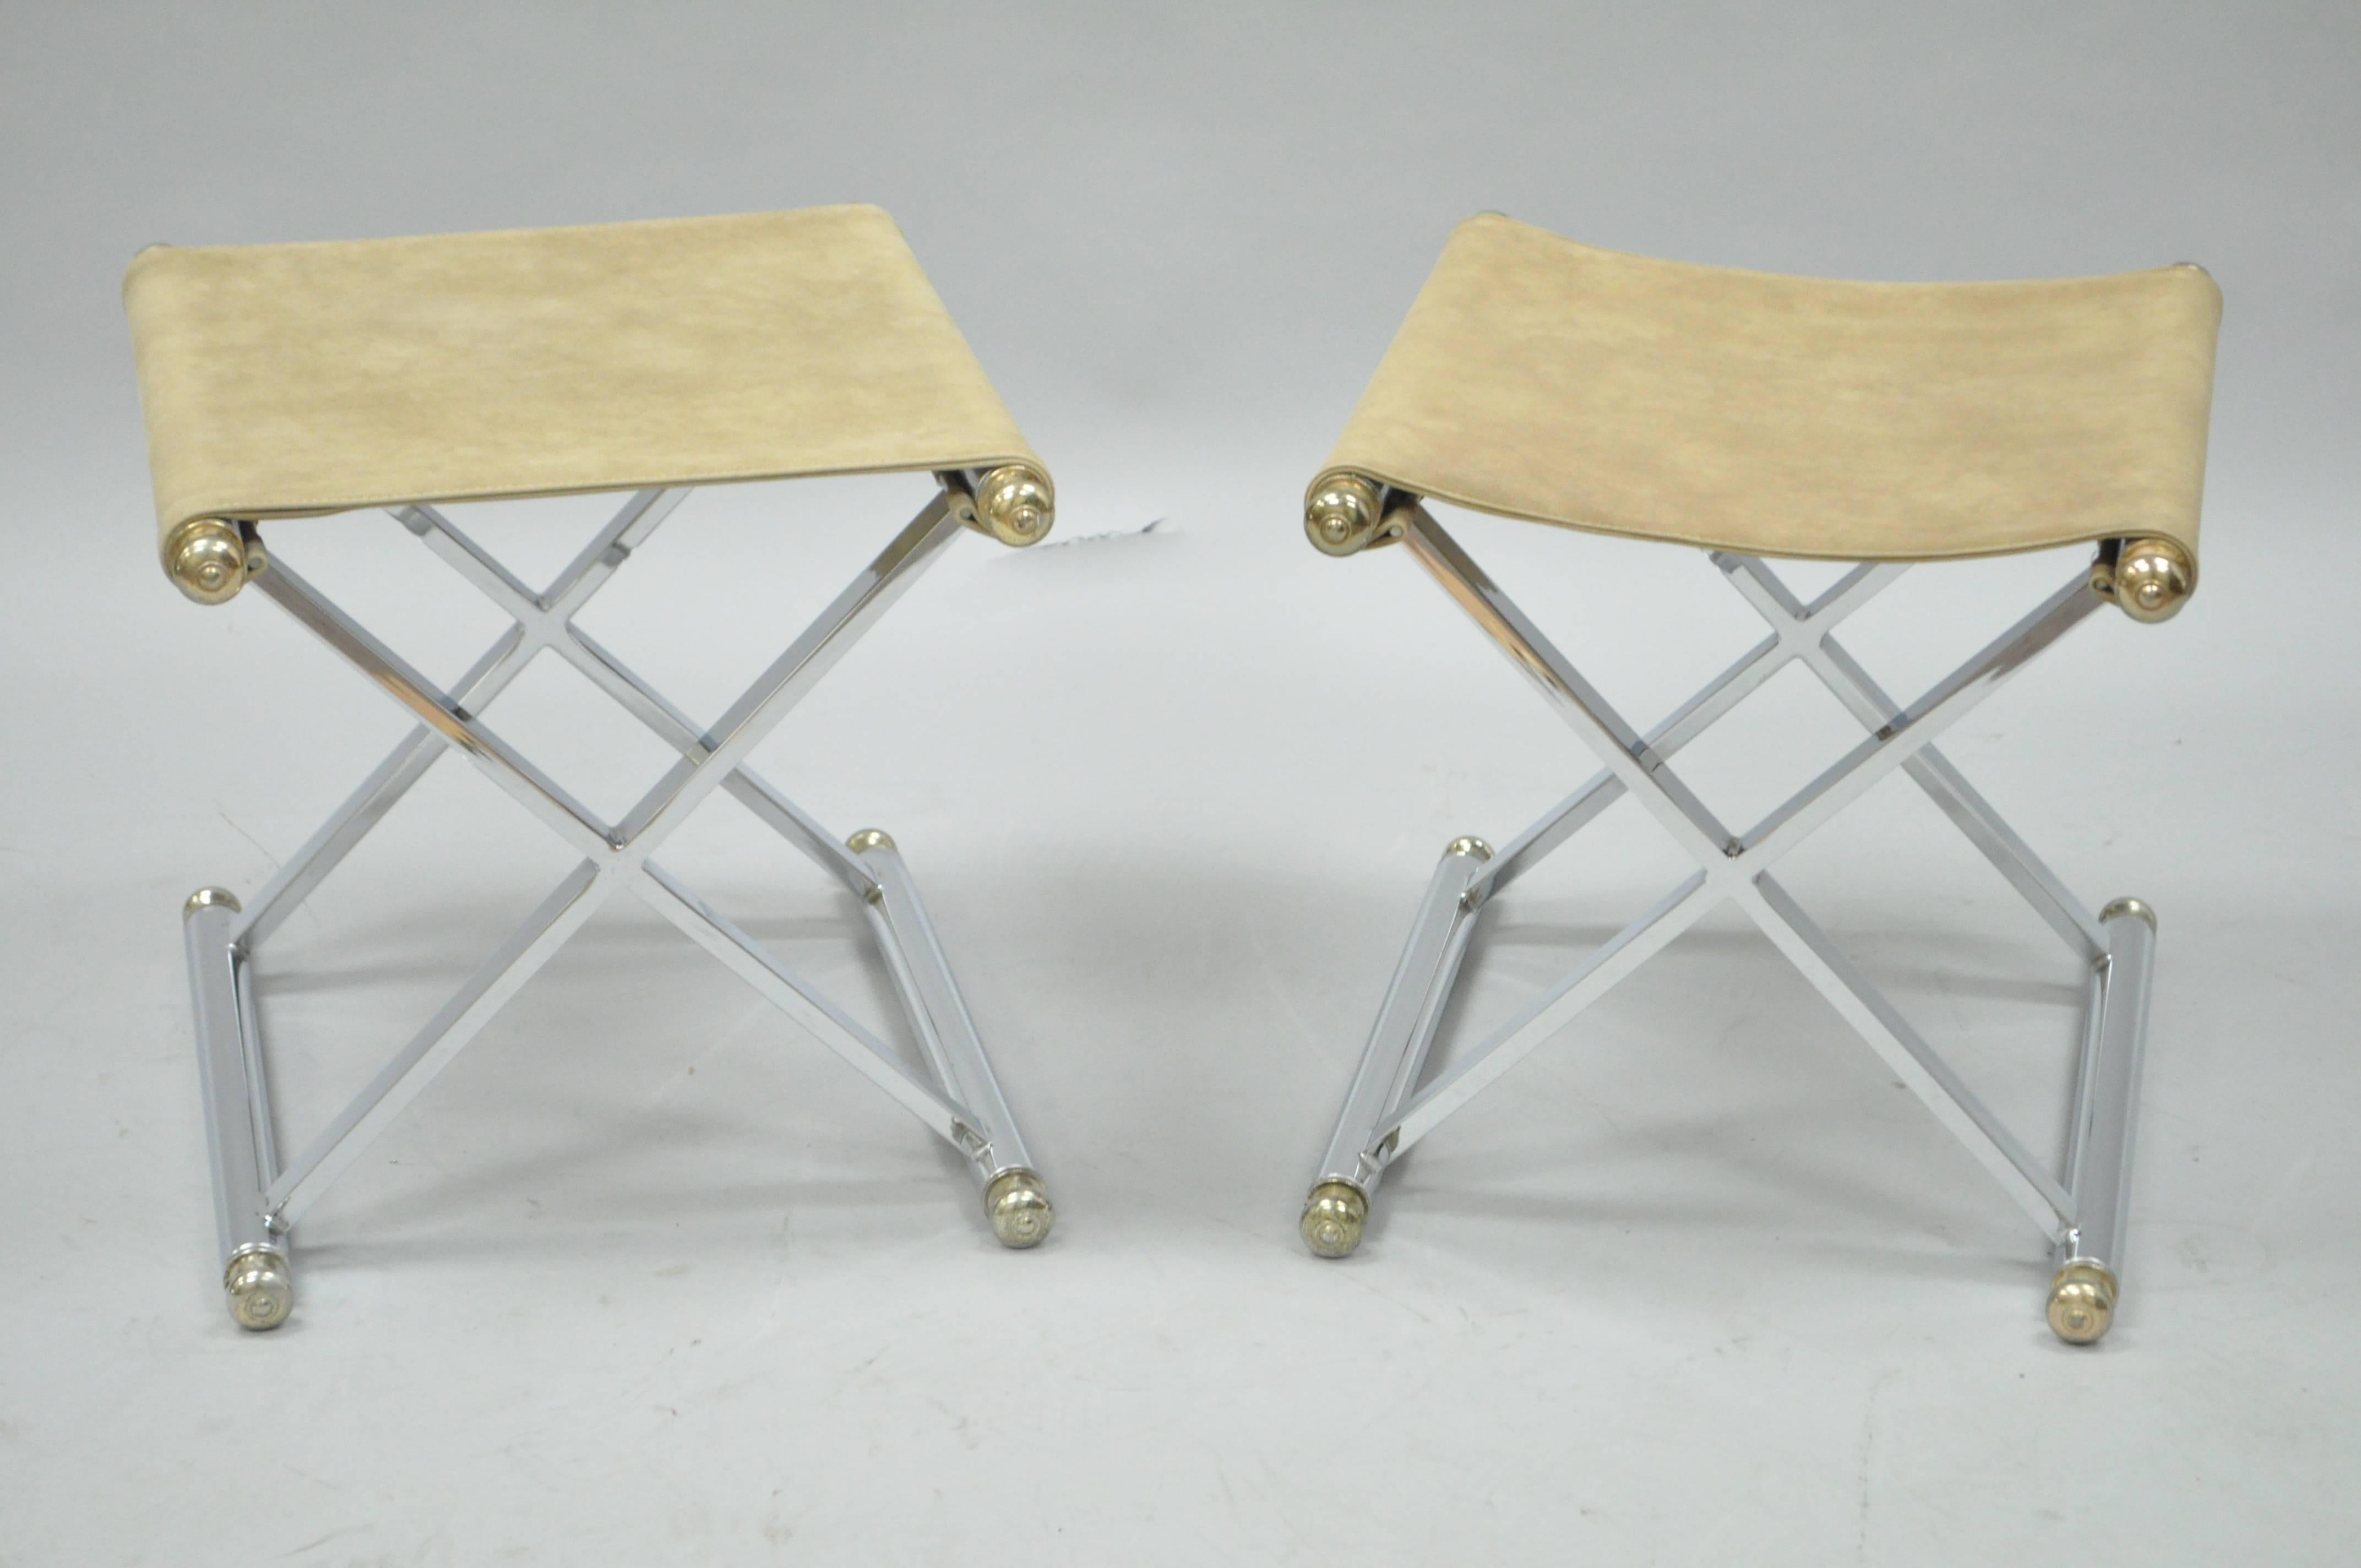 Pair of vintage Hollywood Regency X-base chrome and brass stools in the manner of Maison Jansen. The pair features polished chrome x-form frames, seamless joints, brass tone finials, and original tan suede seats.